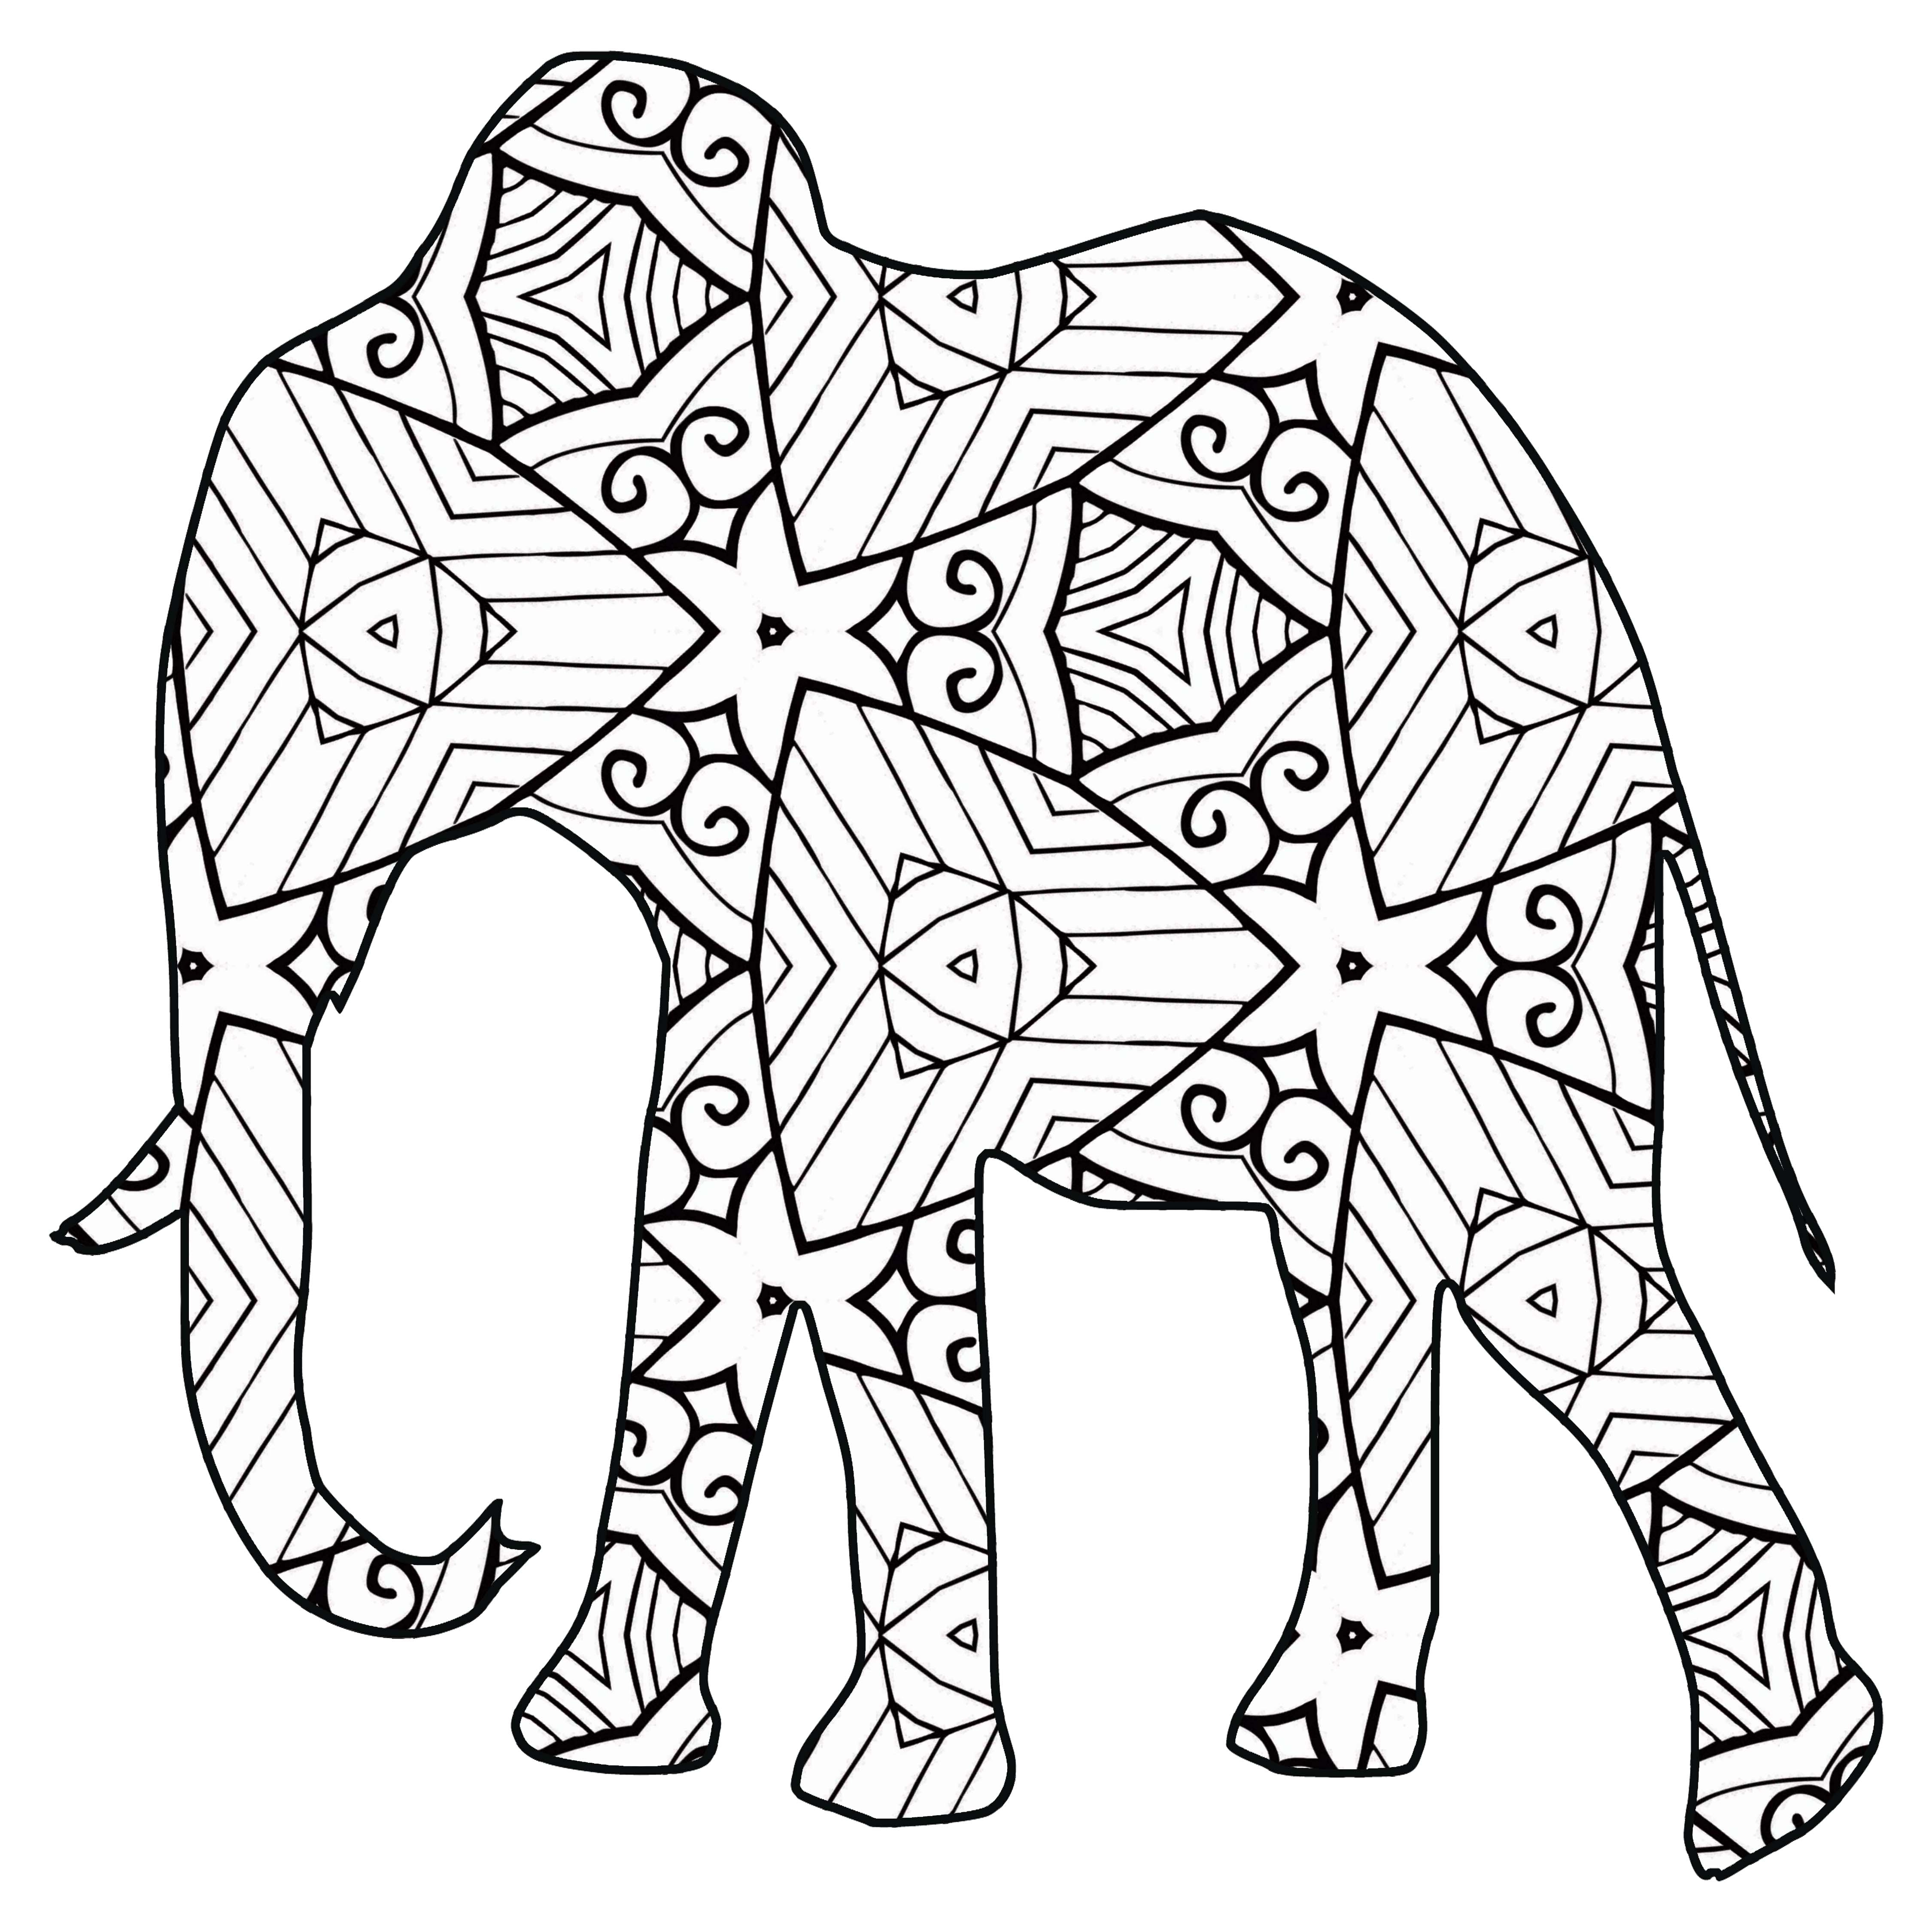 Geometric Coloring Page 30 Free Printable Geometric Animal Coloring Pages The Cottage Market